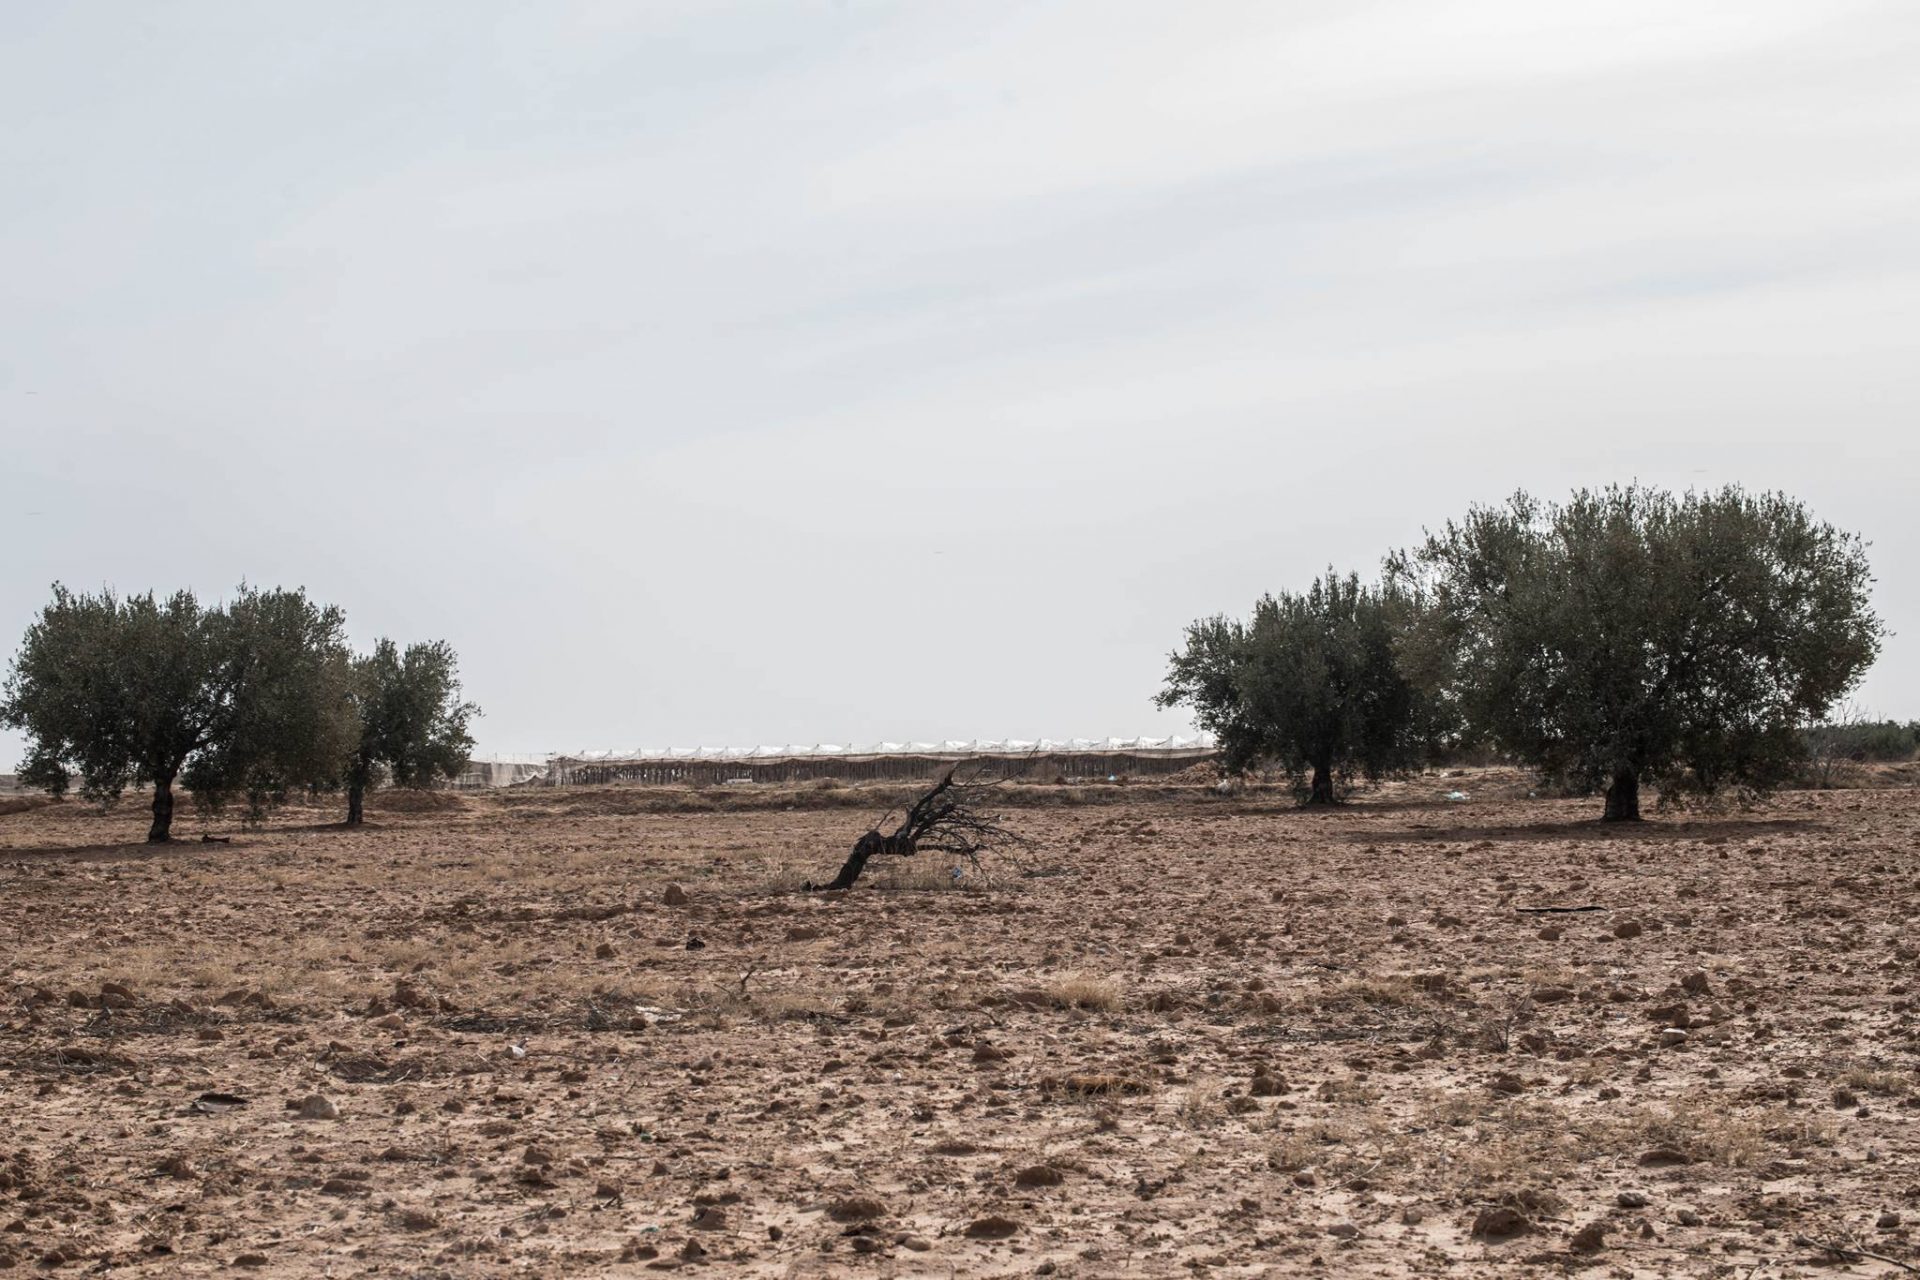 Tunisia: pollution and drought